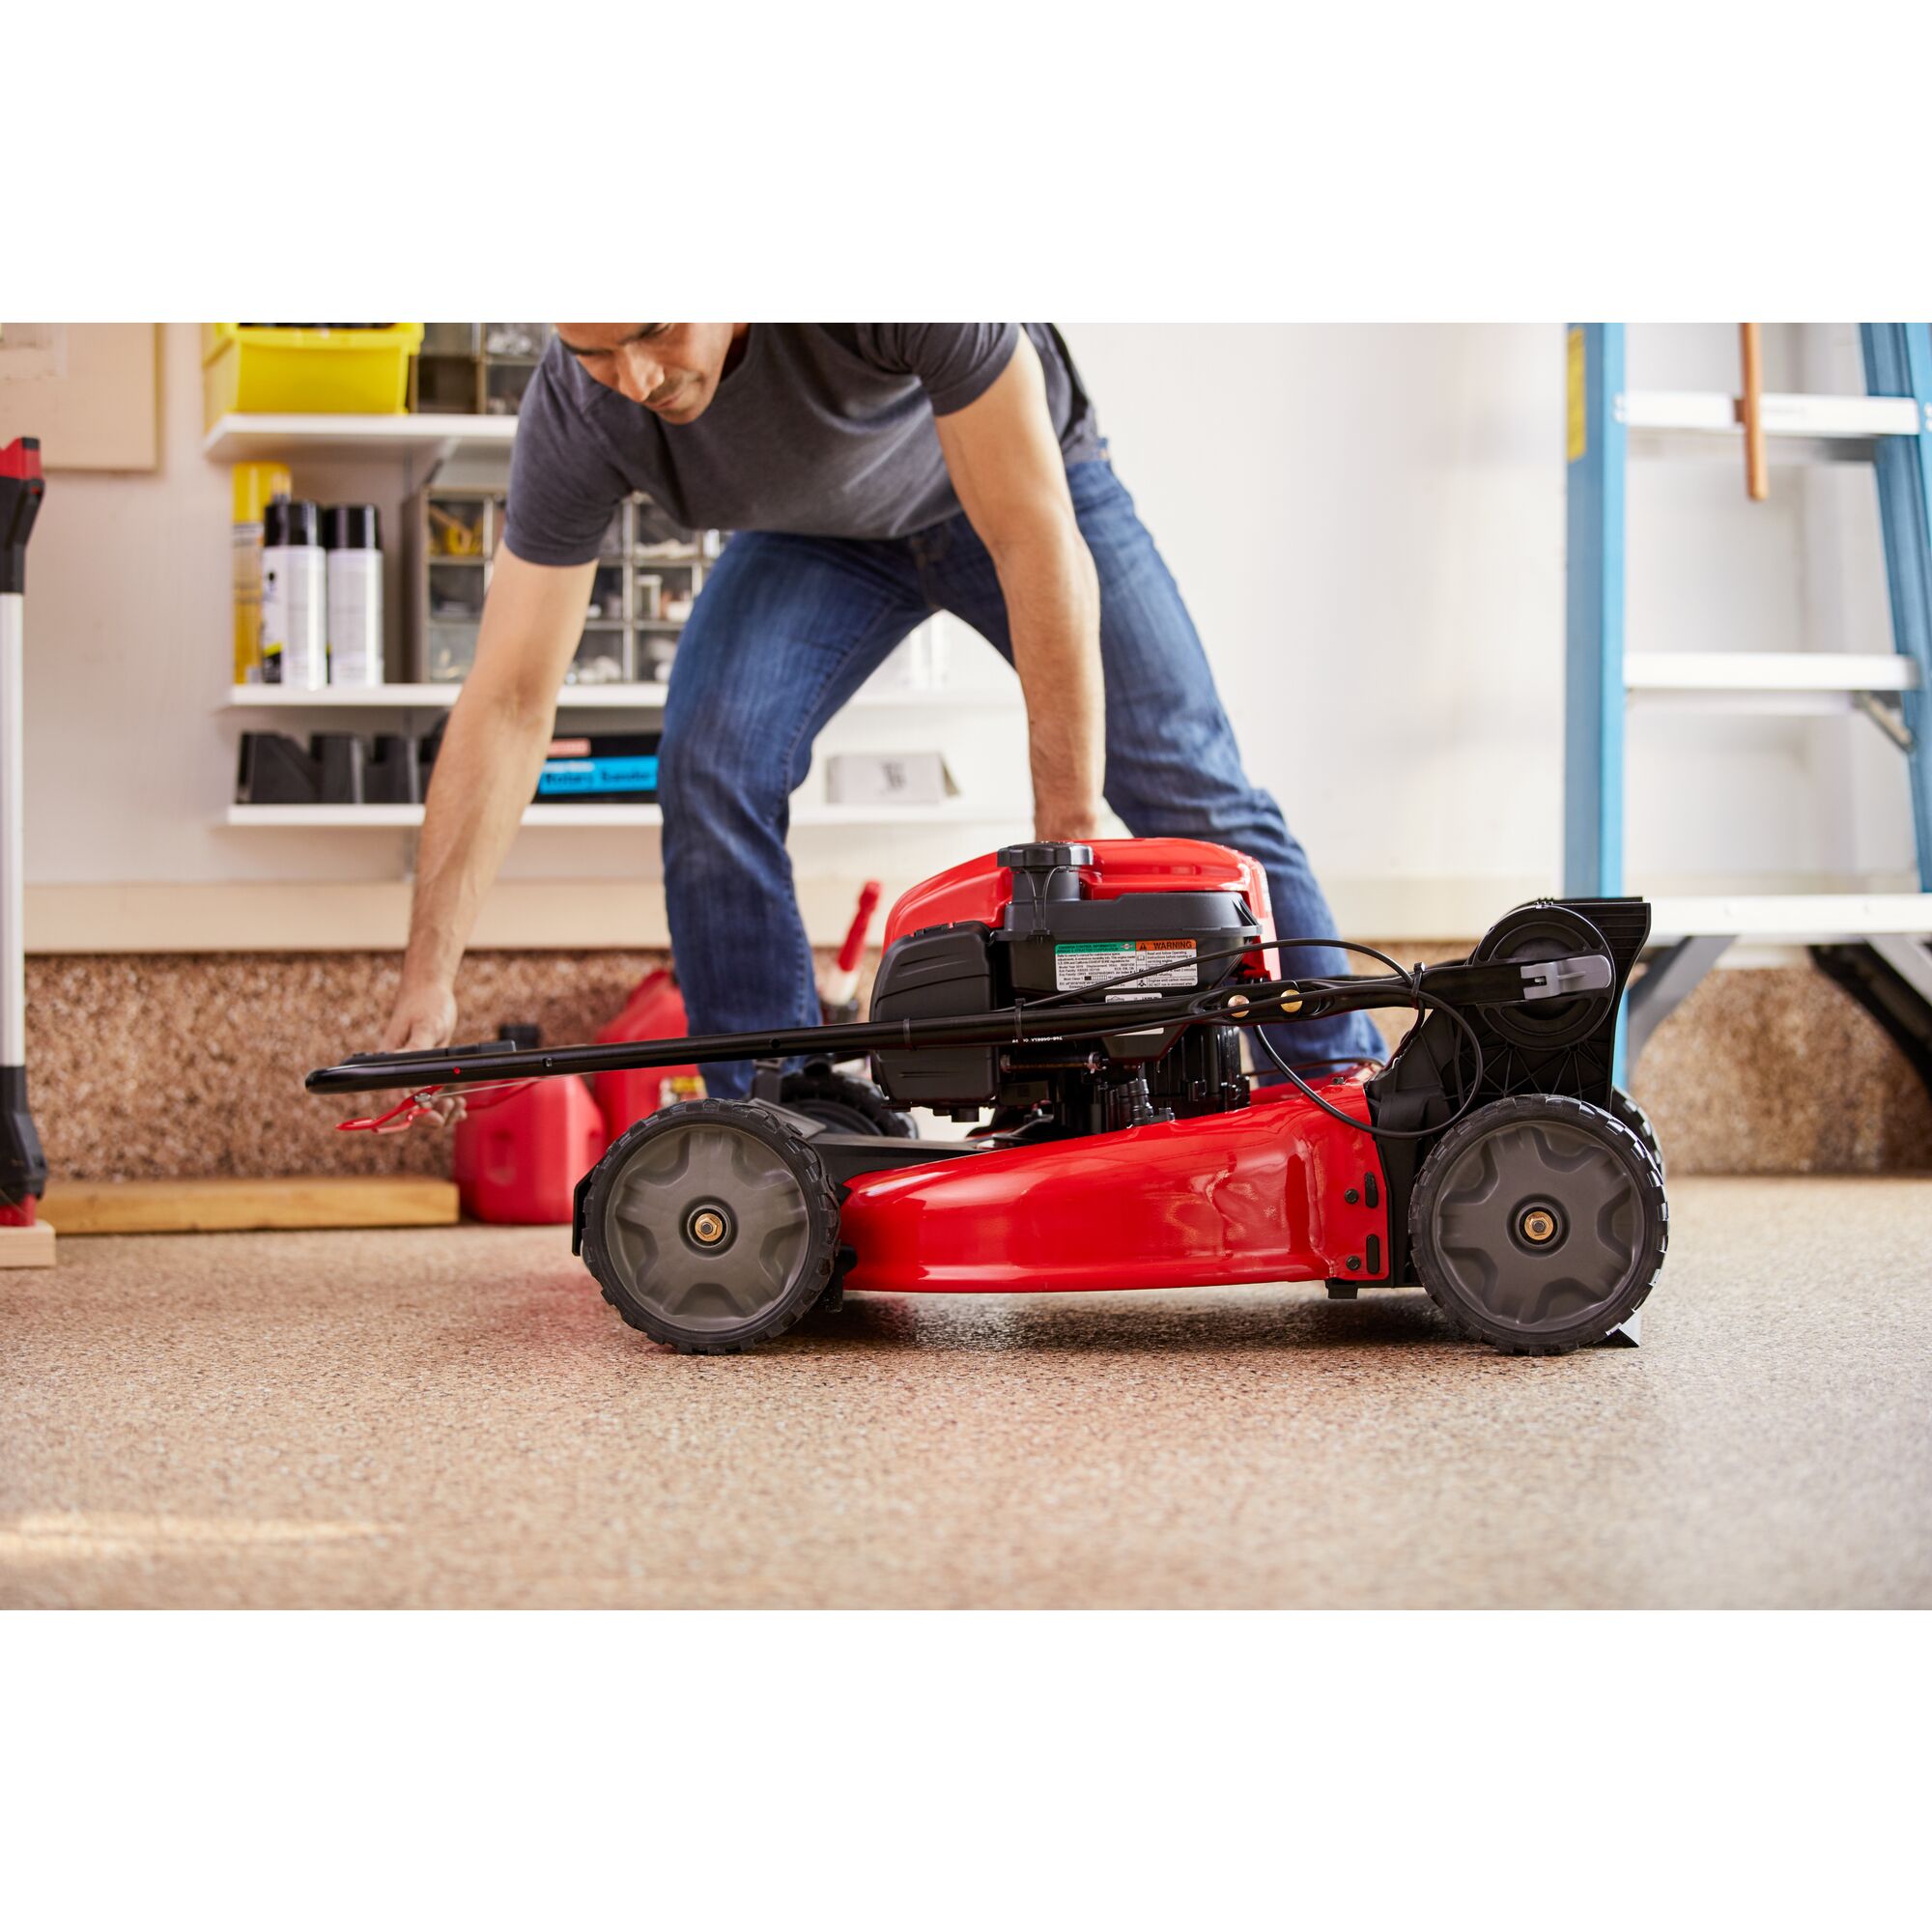 CRAFTSMAN M260 21-IN.163cc Fwd Self-Propelled Mower handles folded over preparing for vertical storage